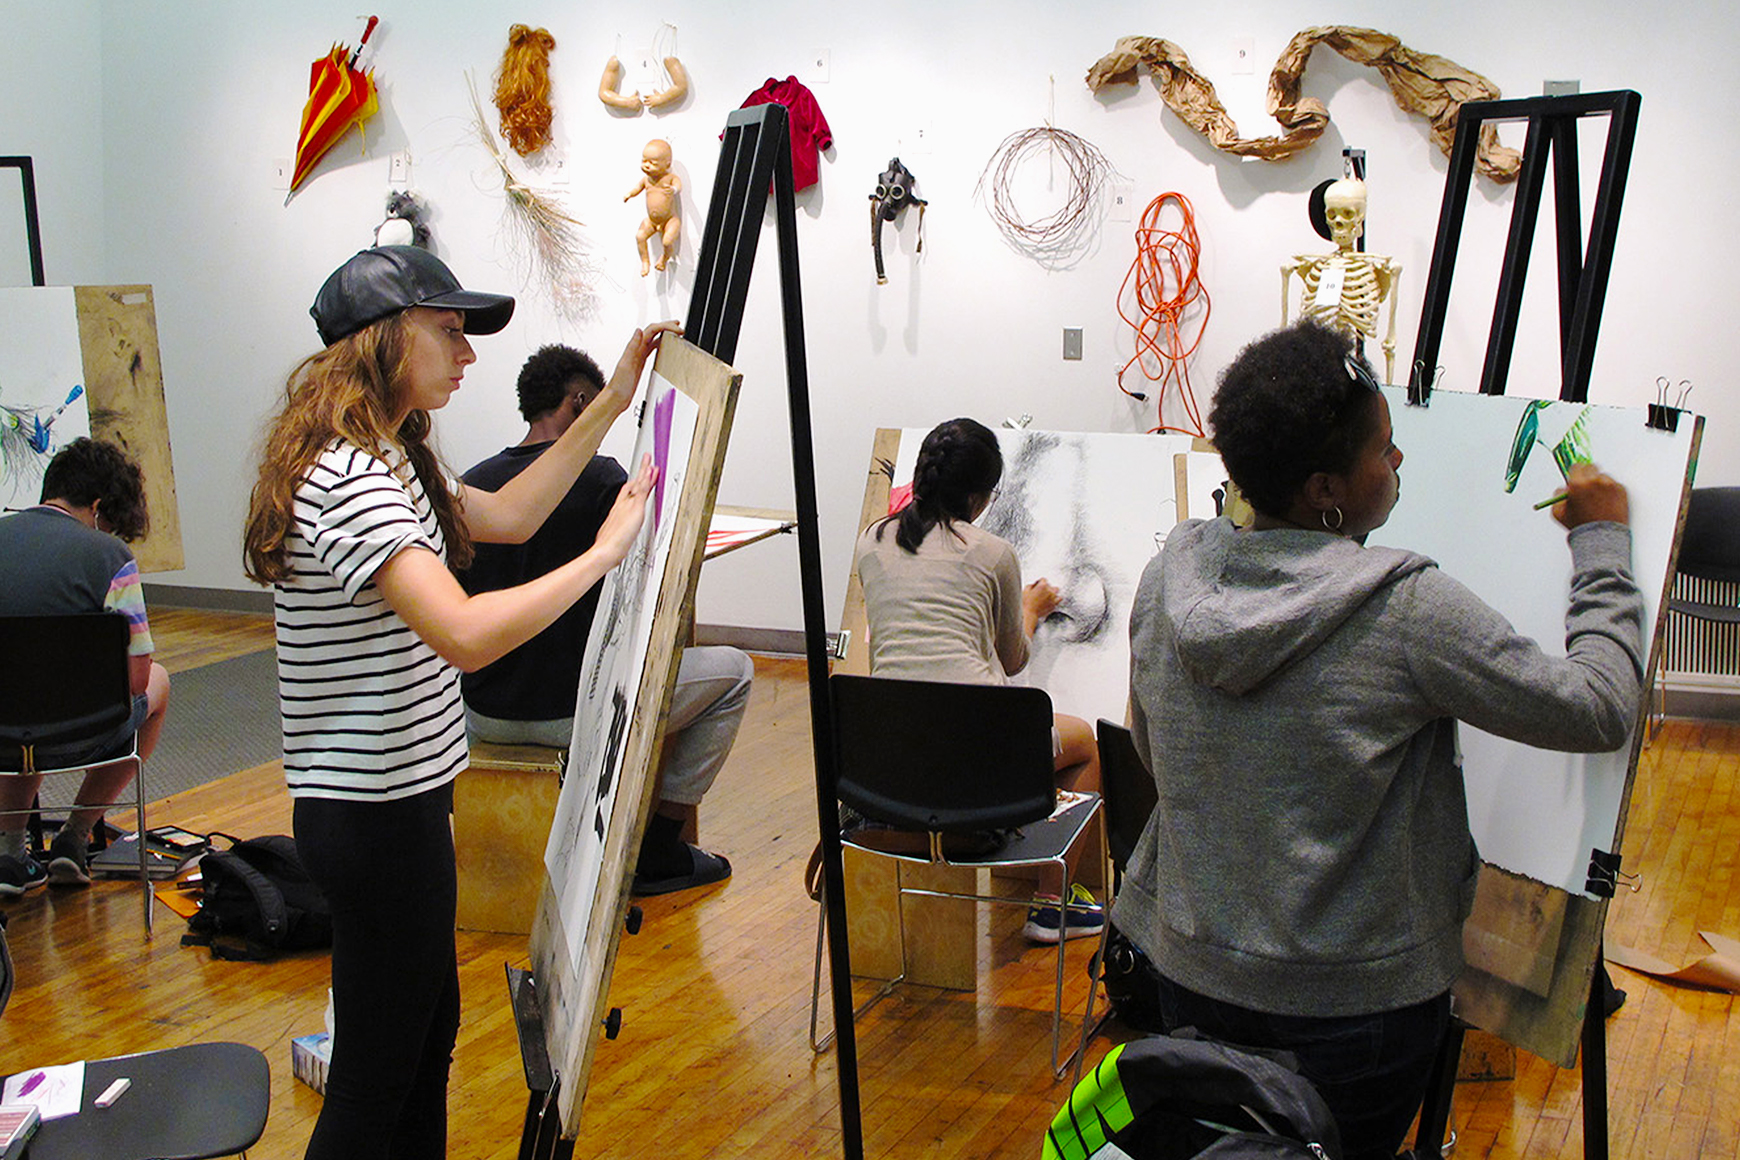 A group of people working on easels in an art studio.